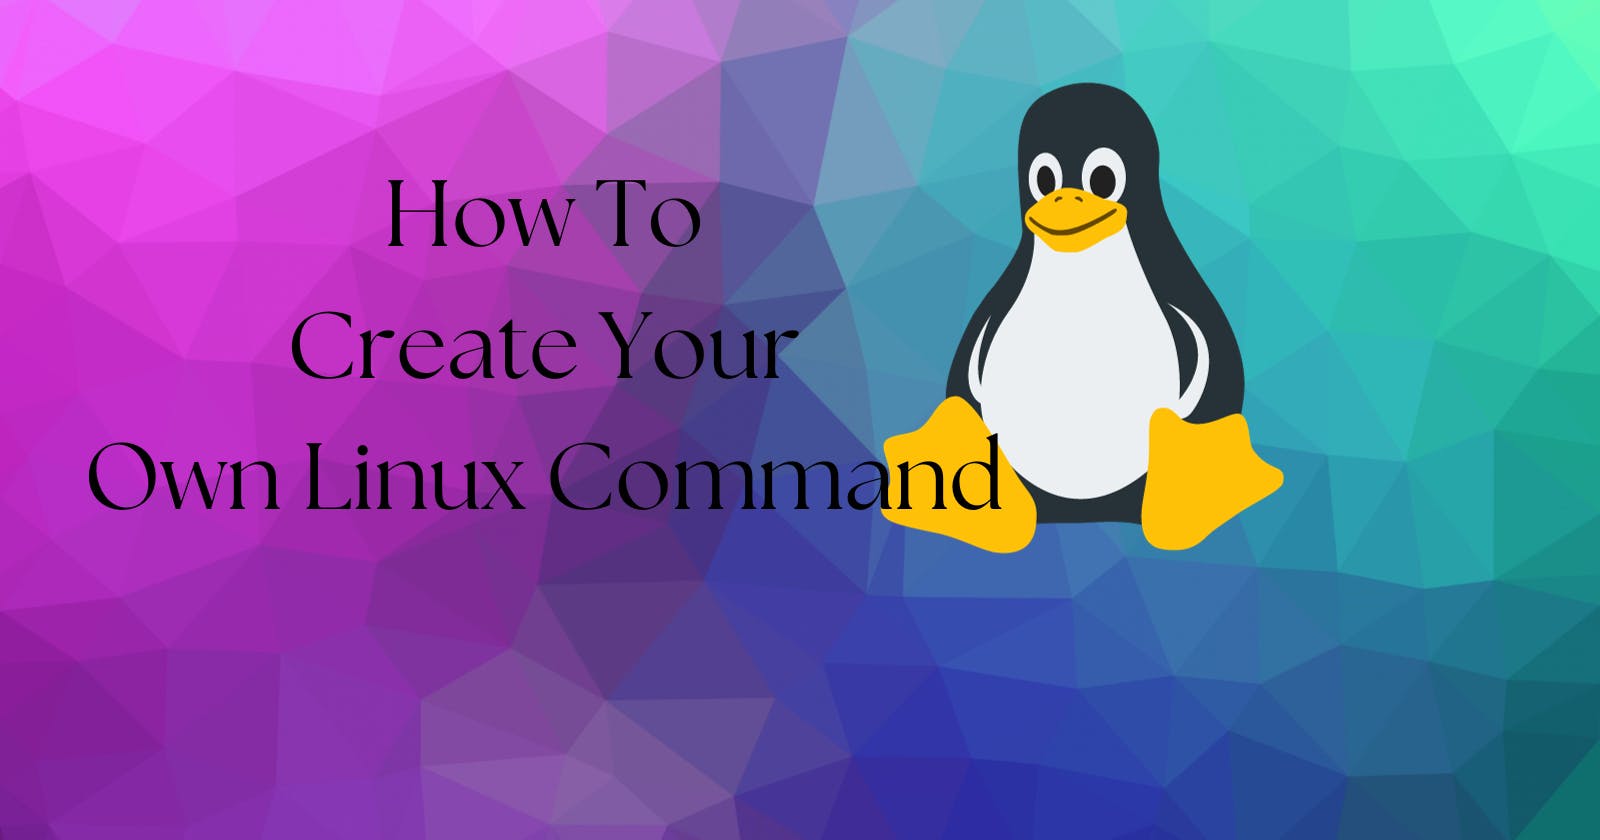 Create your own Linux command